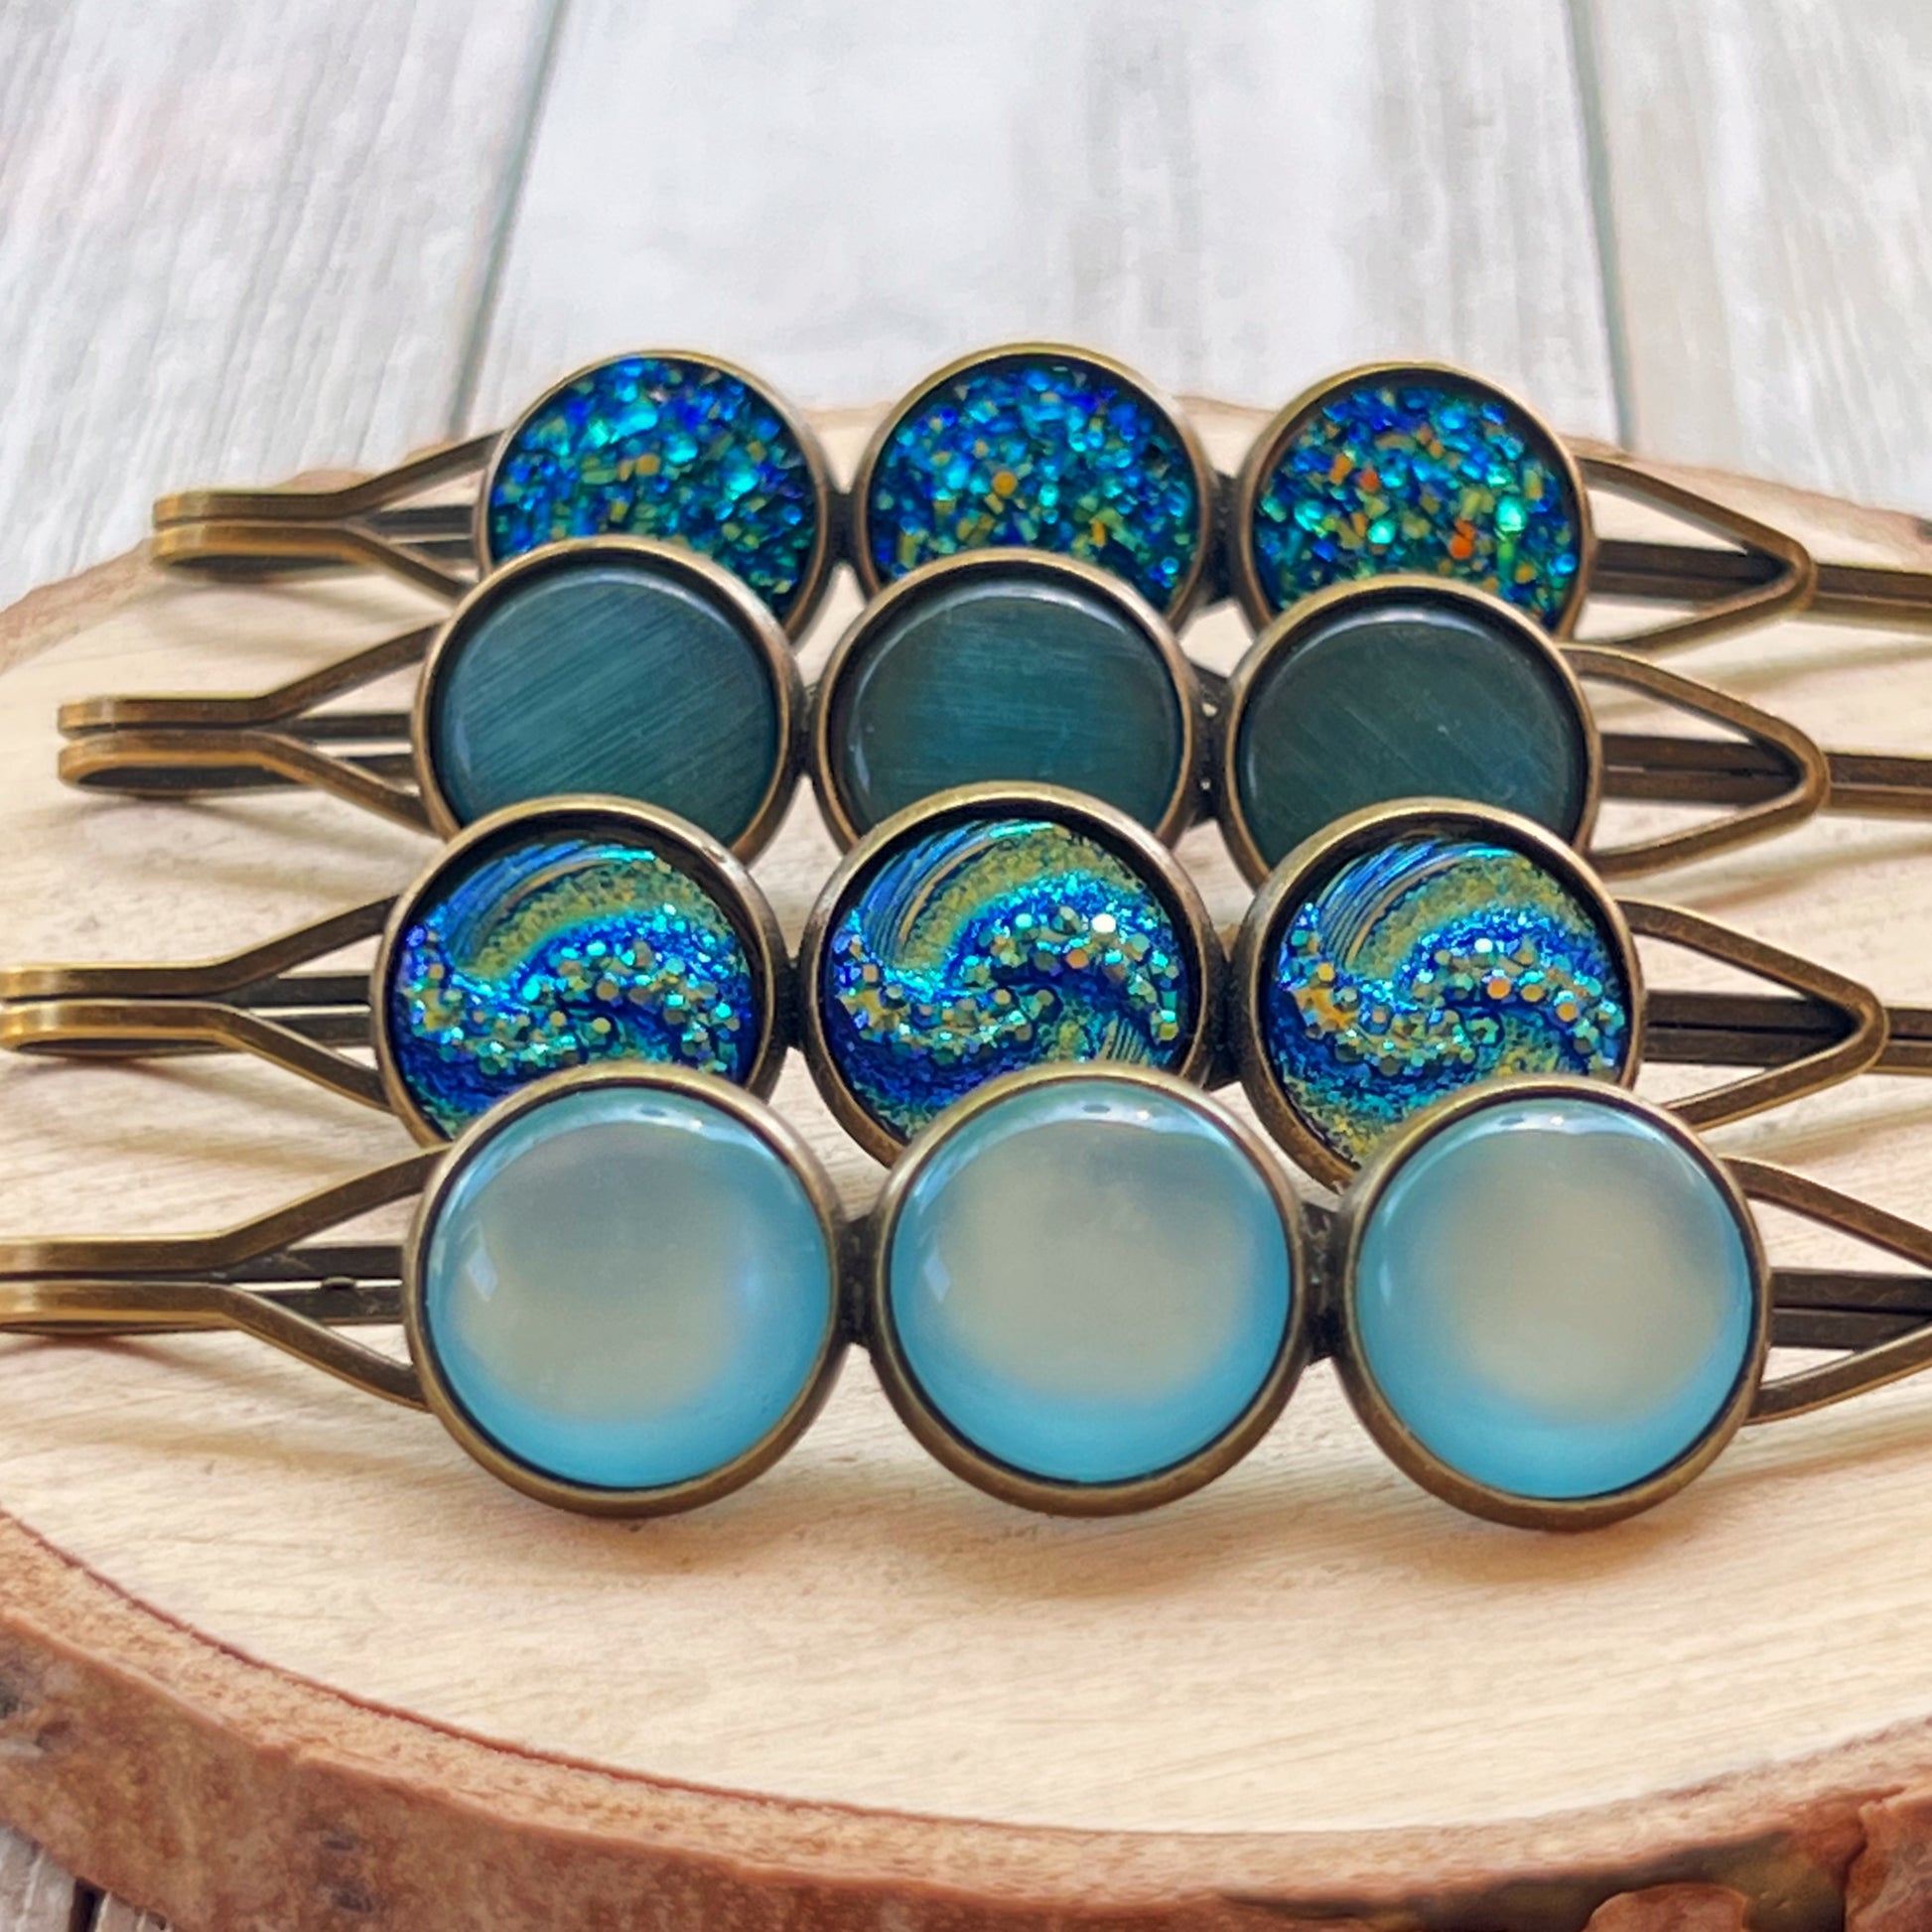 Blue Druzy Hair Pins Set of 4 - Chic Women's Hair Accessories | Hair Clips & Bobby Pins for Stylish Looks